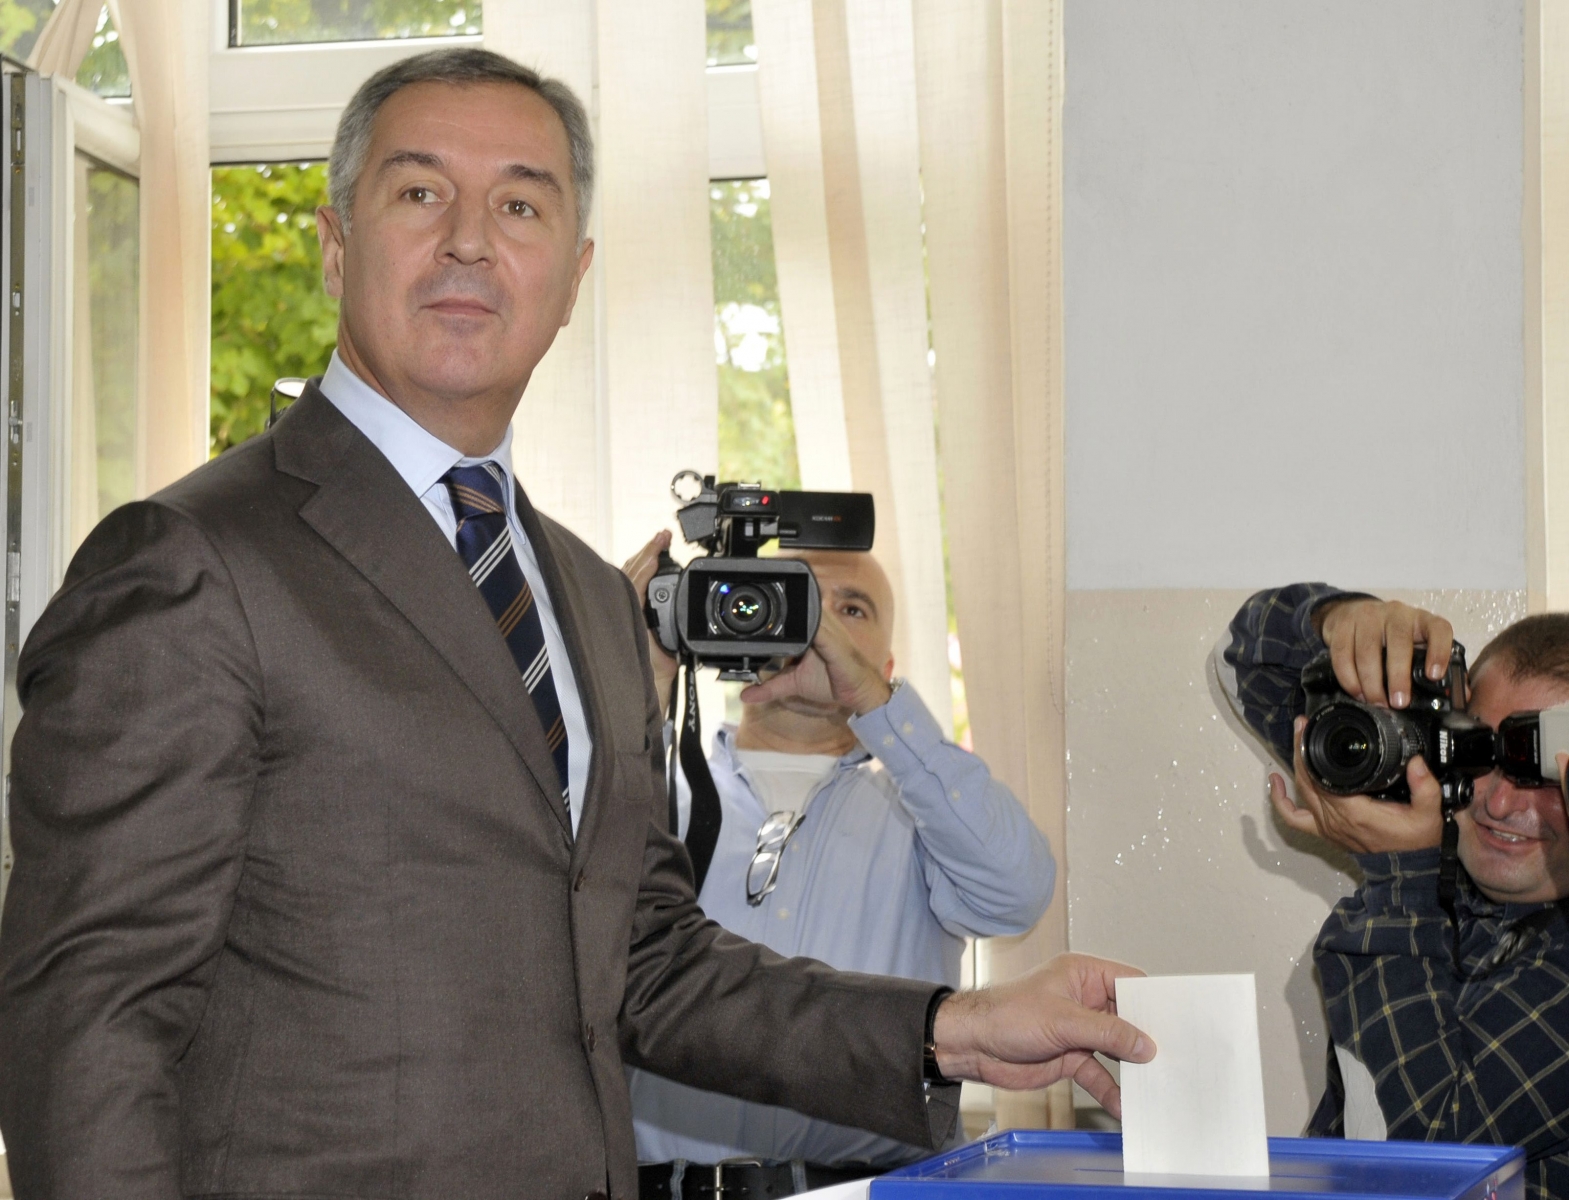 Montenegro?s ruling coalition of longtime leader Milo Djukanovic casts his ballot at the polling station in downtown Podgorica, Montenegro, Sunday, Oct. 14, 2012. Djukanovic is again a favorite to win weekend parliamentary elections in the tiny Balkan nation seeking membership in the European Union. (AP Photo/Risto Bozovic)